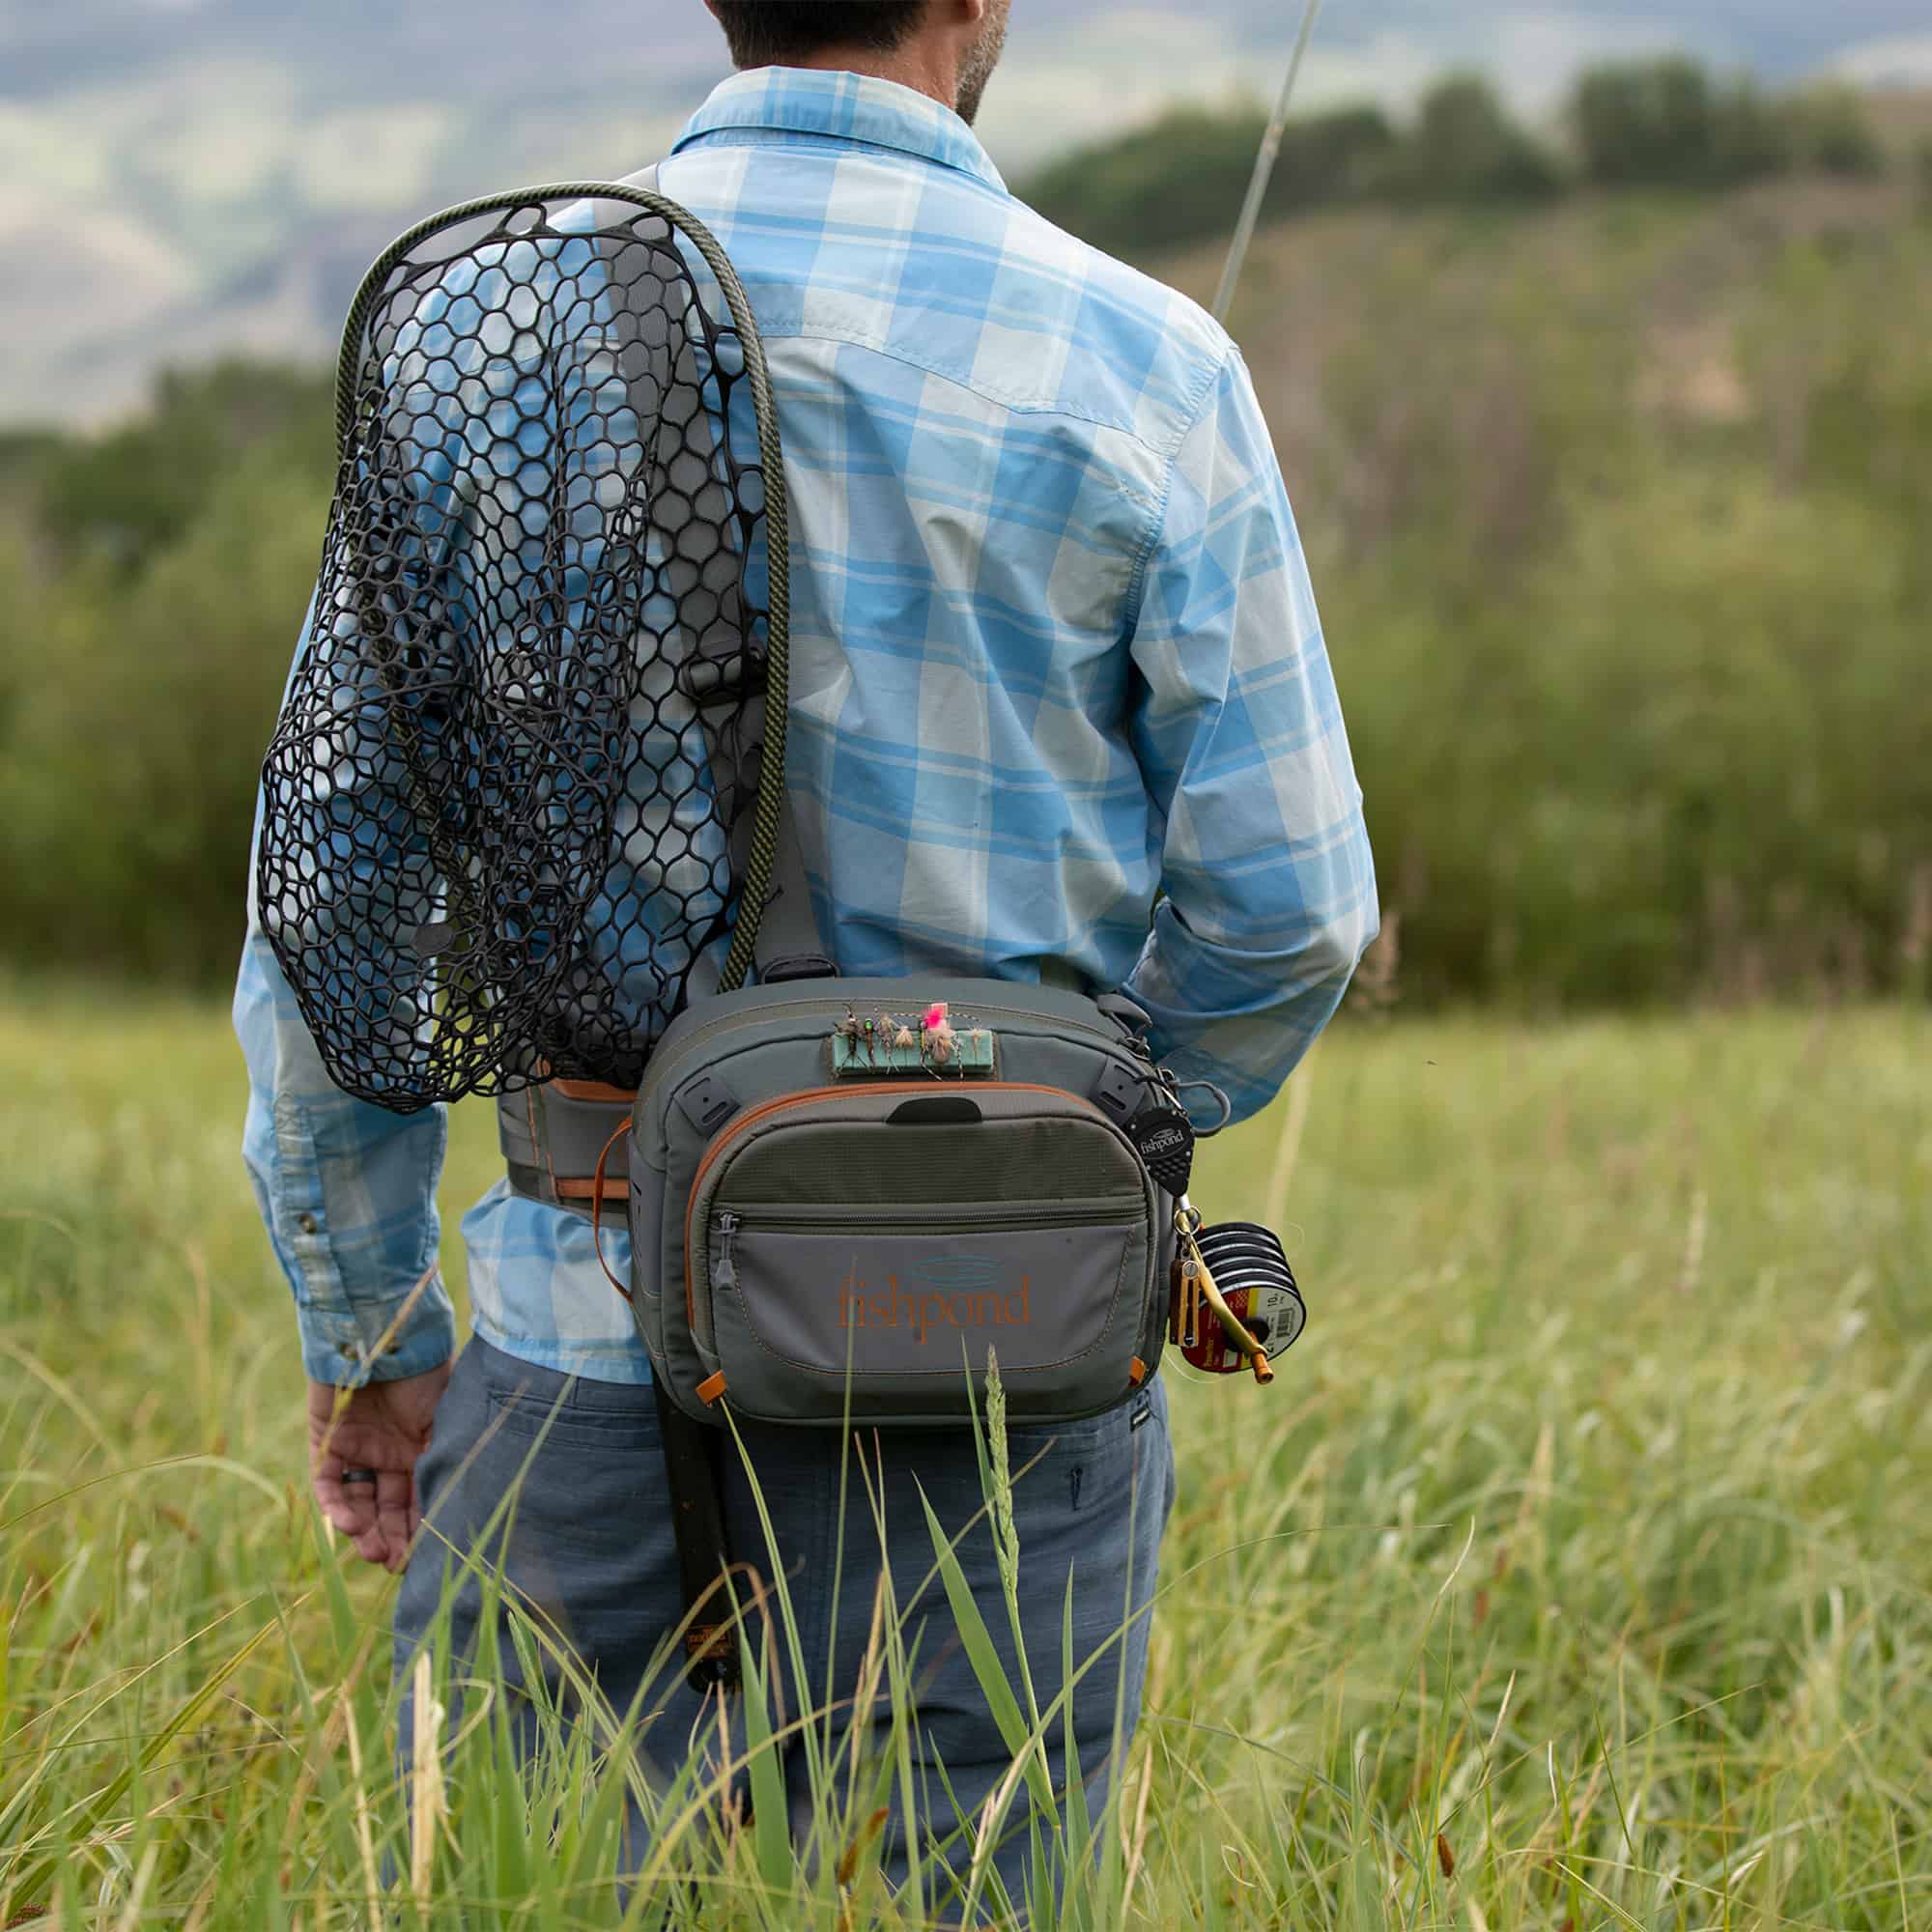 Fishpond Switchback Pro Wading System – Tactical Fly Fisher